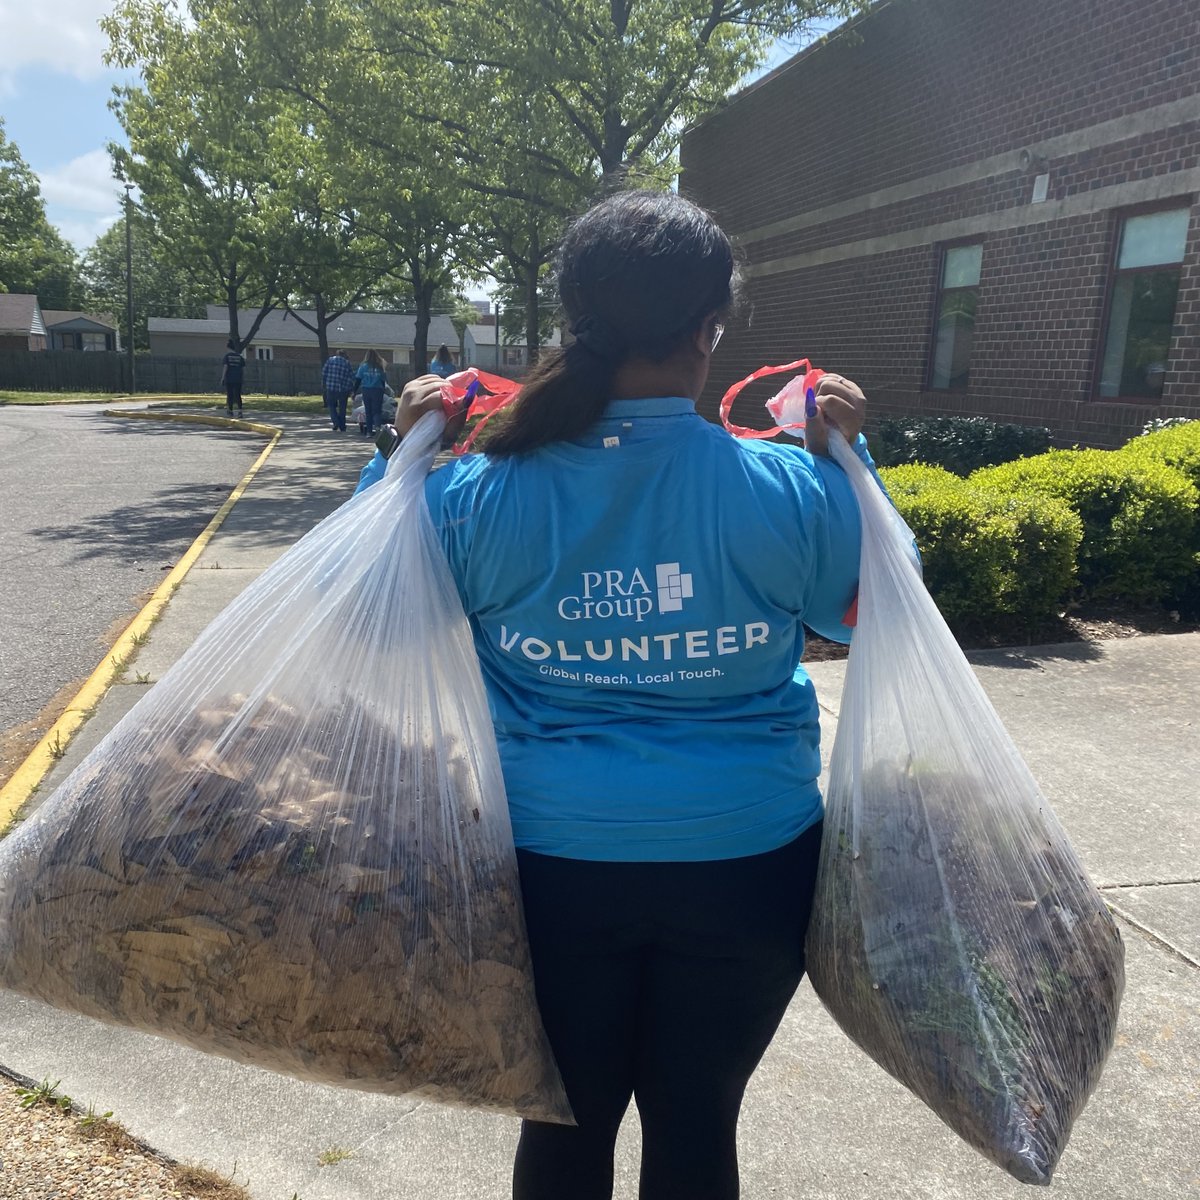 PRA Group is proud to partner with @unitedwayshr for Day of Action, an annual @UnitedWay event. Our colleagues in Norfolk, Virginia, celebrated by visiting Thurgood Marshall Elementary School to volunteer in their garden, pitching in with landscaping help and outdoor decorations.